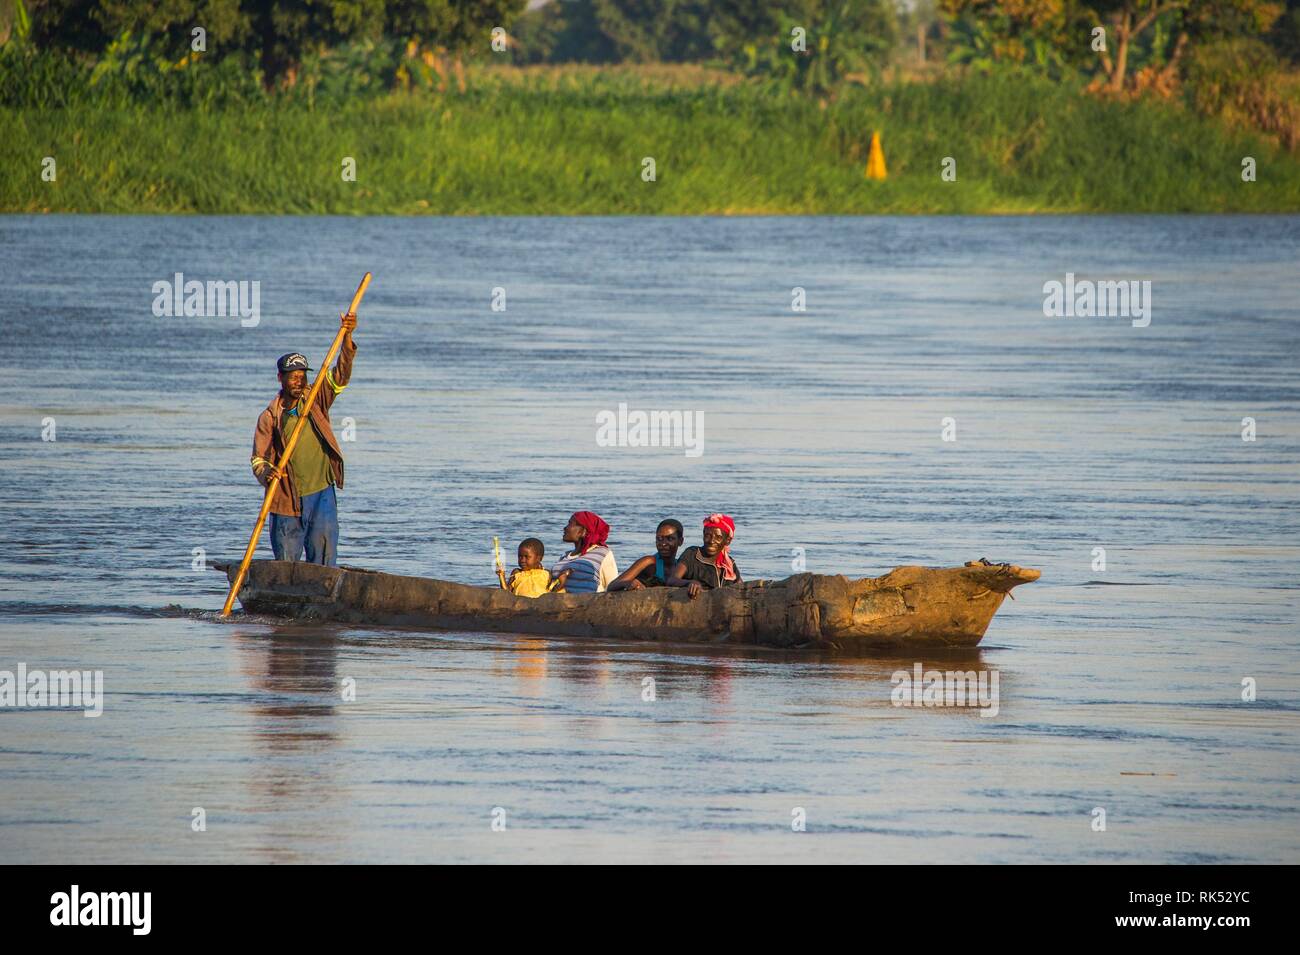 Local people in canoe on the Shire river, Malawi, Africa Stock Photo